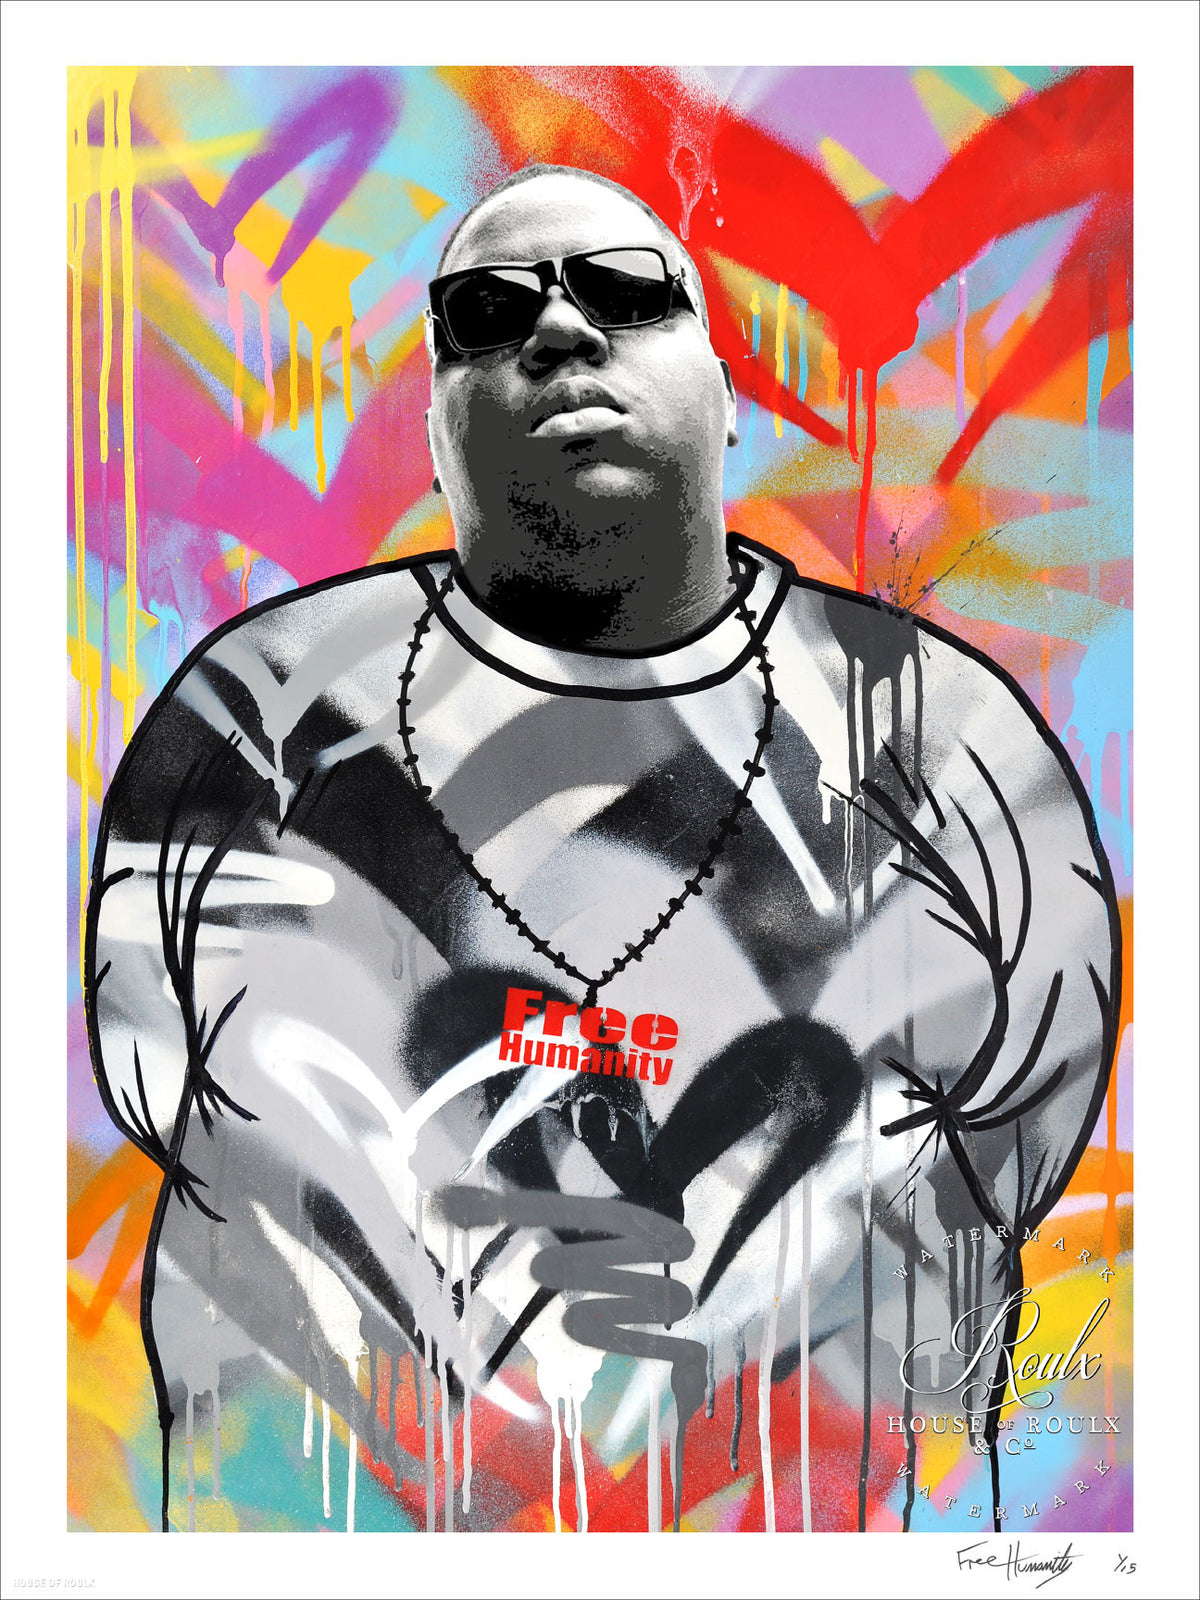 Free Humanity &quot;Notorious B.I.G.&quot; - Limited Edition, Archival Print - 18 x 24&quot;